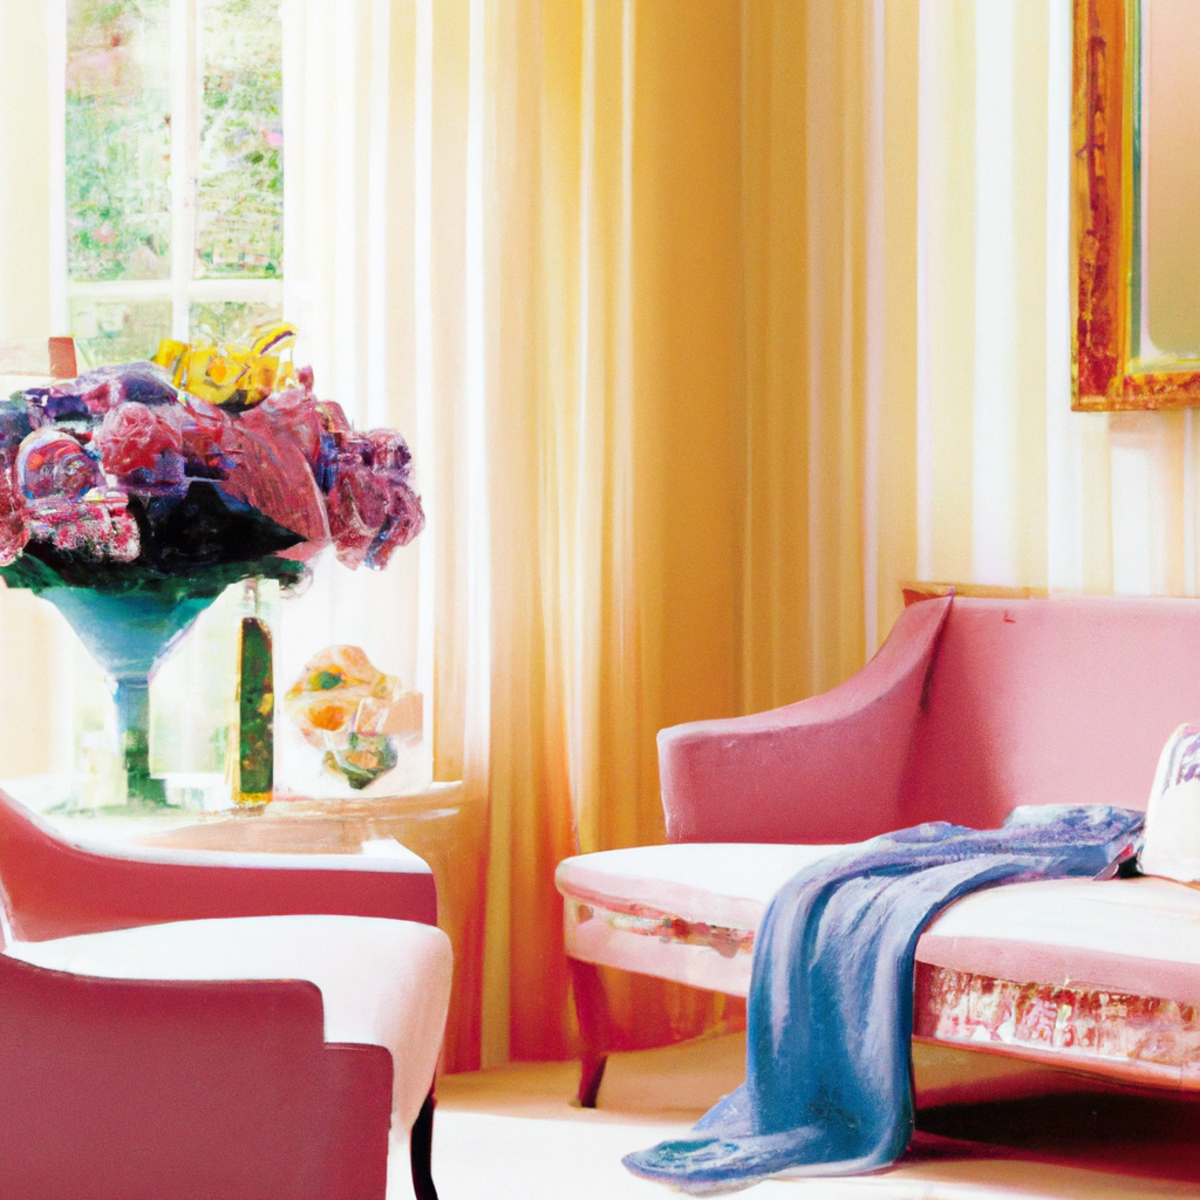 Tranquil room with flowers, armchair, essential oils, and diffuser, symbolizing nurturing mental well-being.